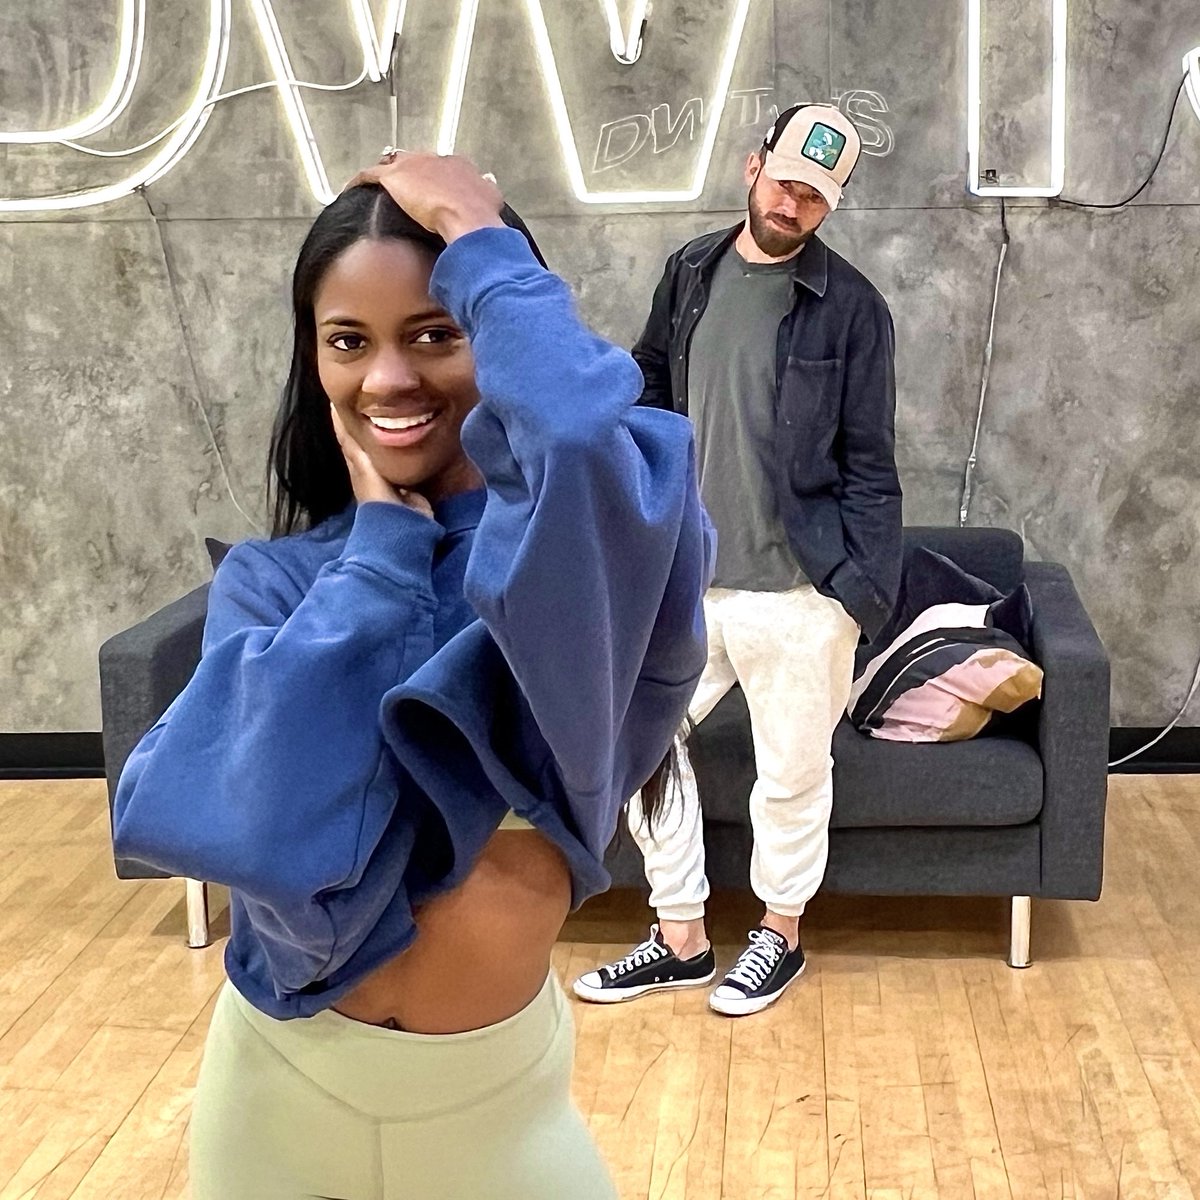 .@charitylaws_ and @artemchigvintse will be shakin’ that thing like you never did see in the #DWTS ballroom! 🔥 Don’t miss their Jazz to queen @janetjackson for #MusicVideoNight, live tonight at 8/7c on ABC and Disney+! Stream on Hulu. 👑